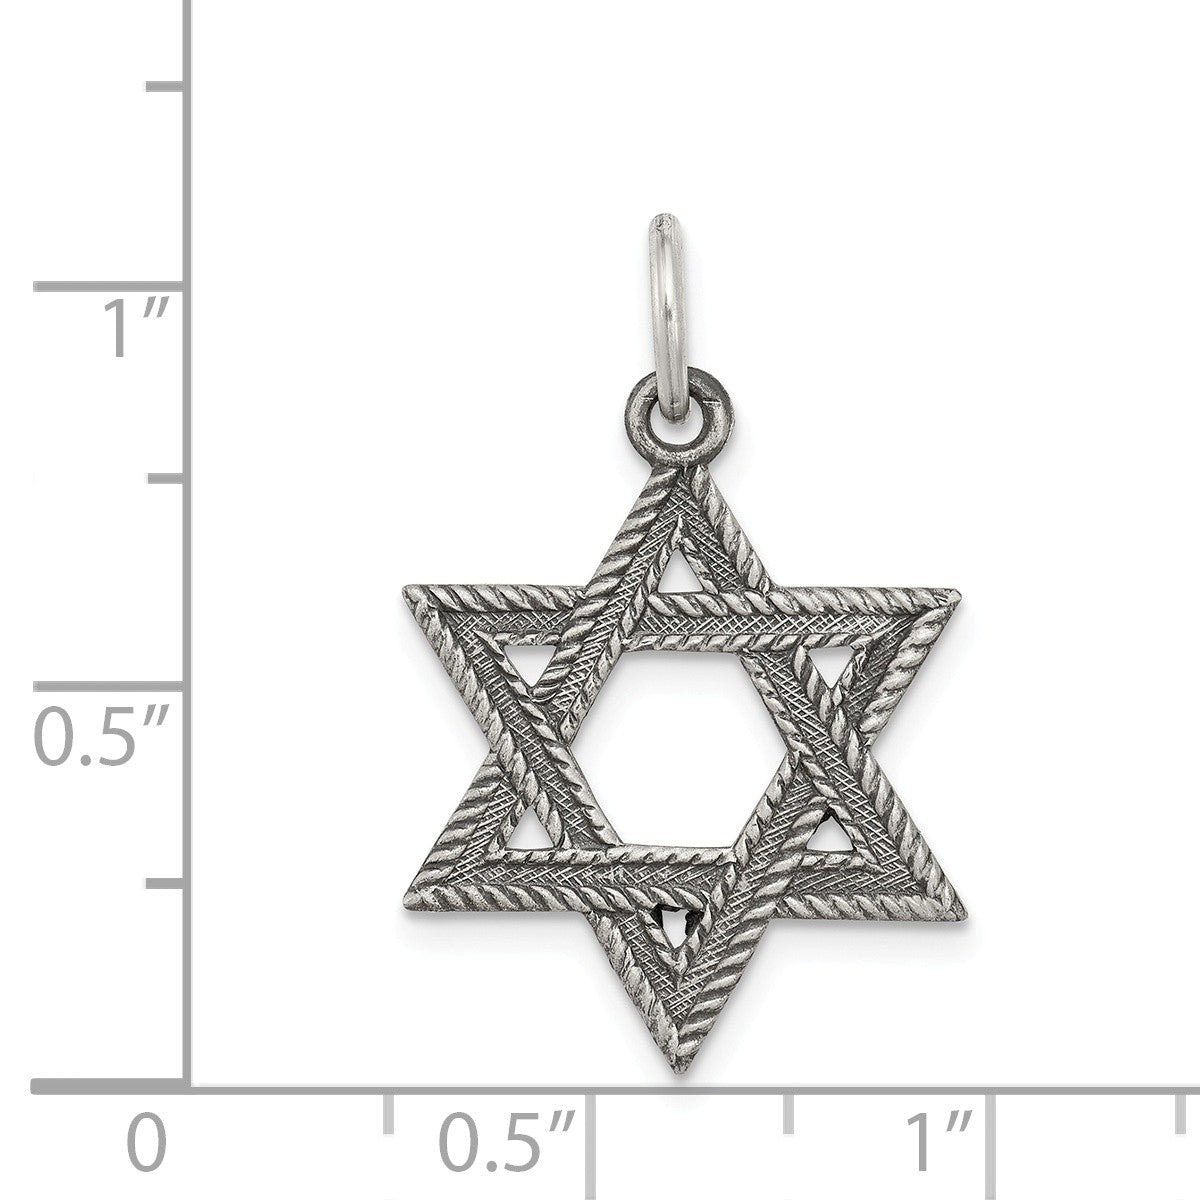 Alternate view of the Sterling Silver Antiqued Textured Star of David Charm or Pendant by The Black Bow Jewelry Co.